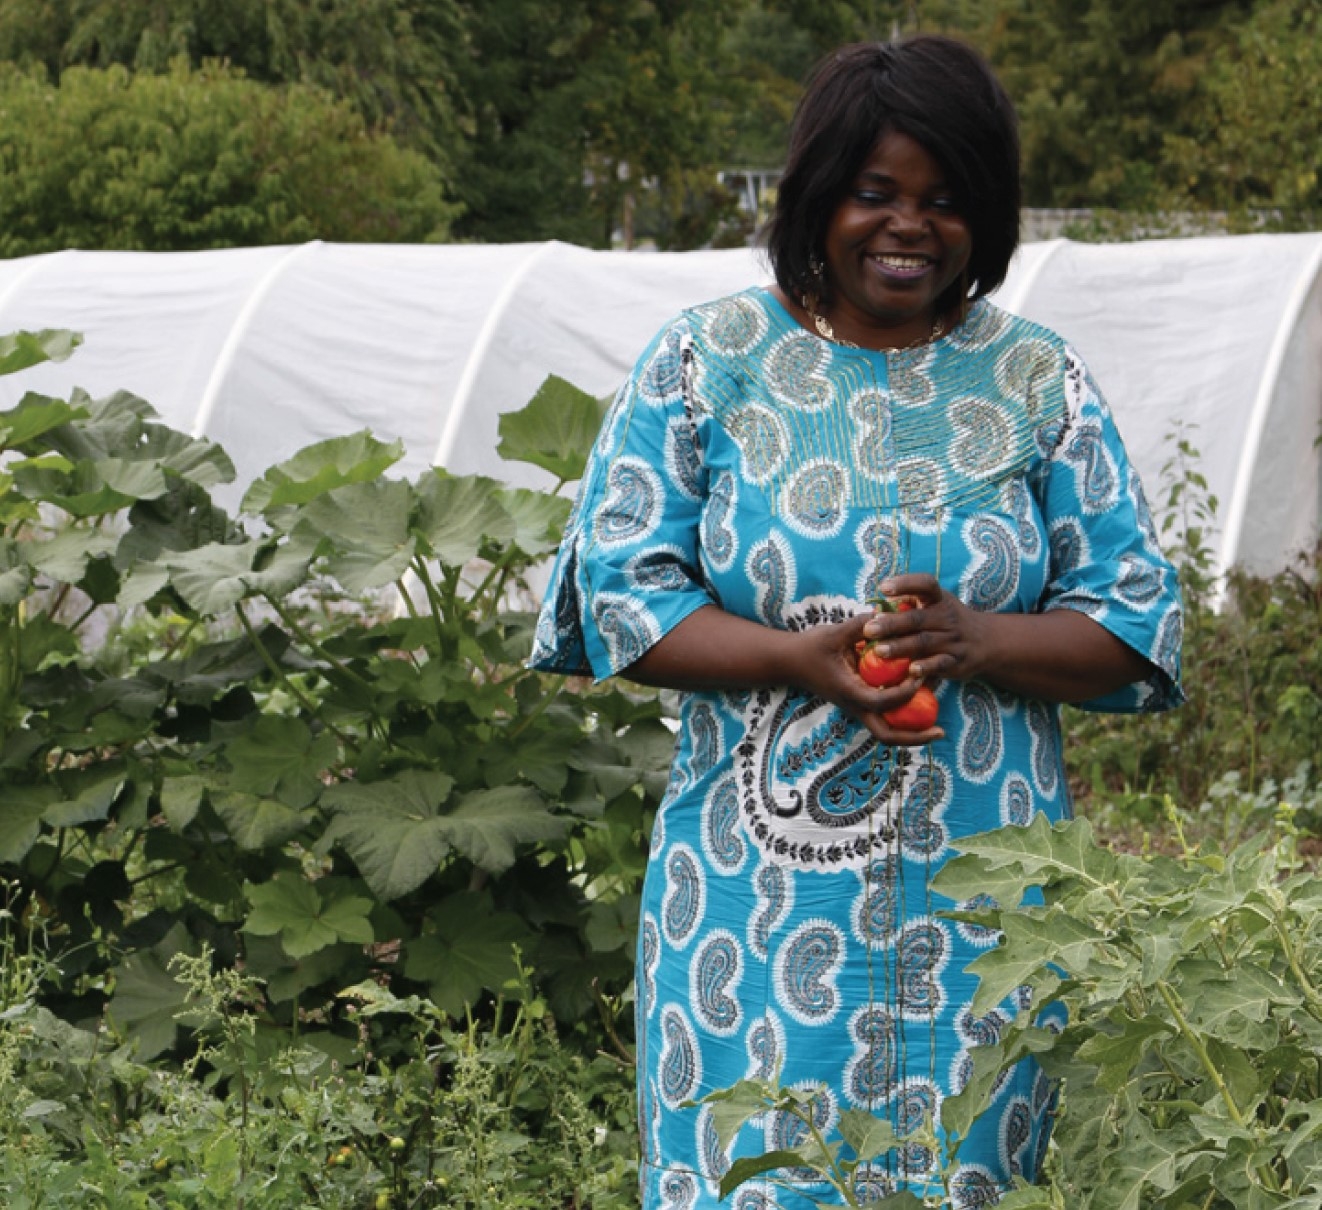 A woman standing in field holding tomatoes.